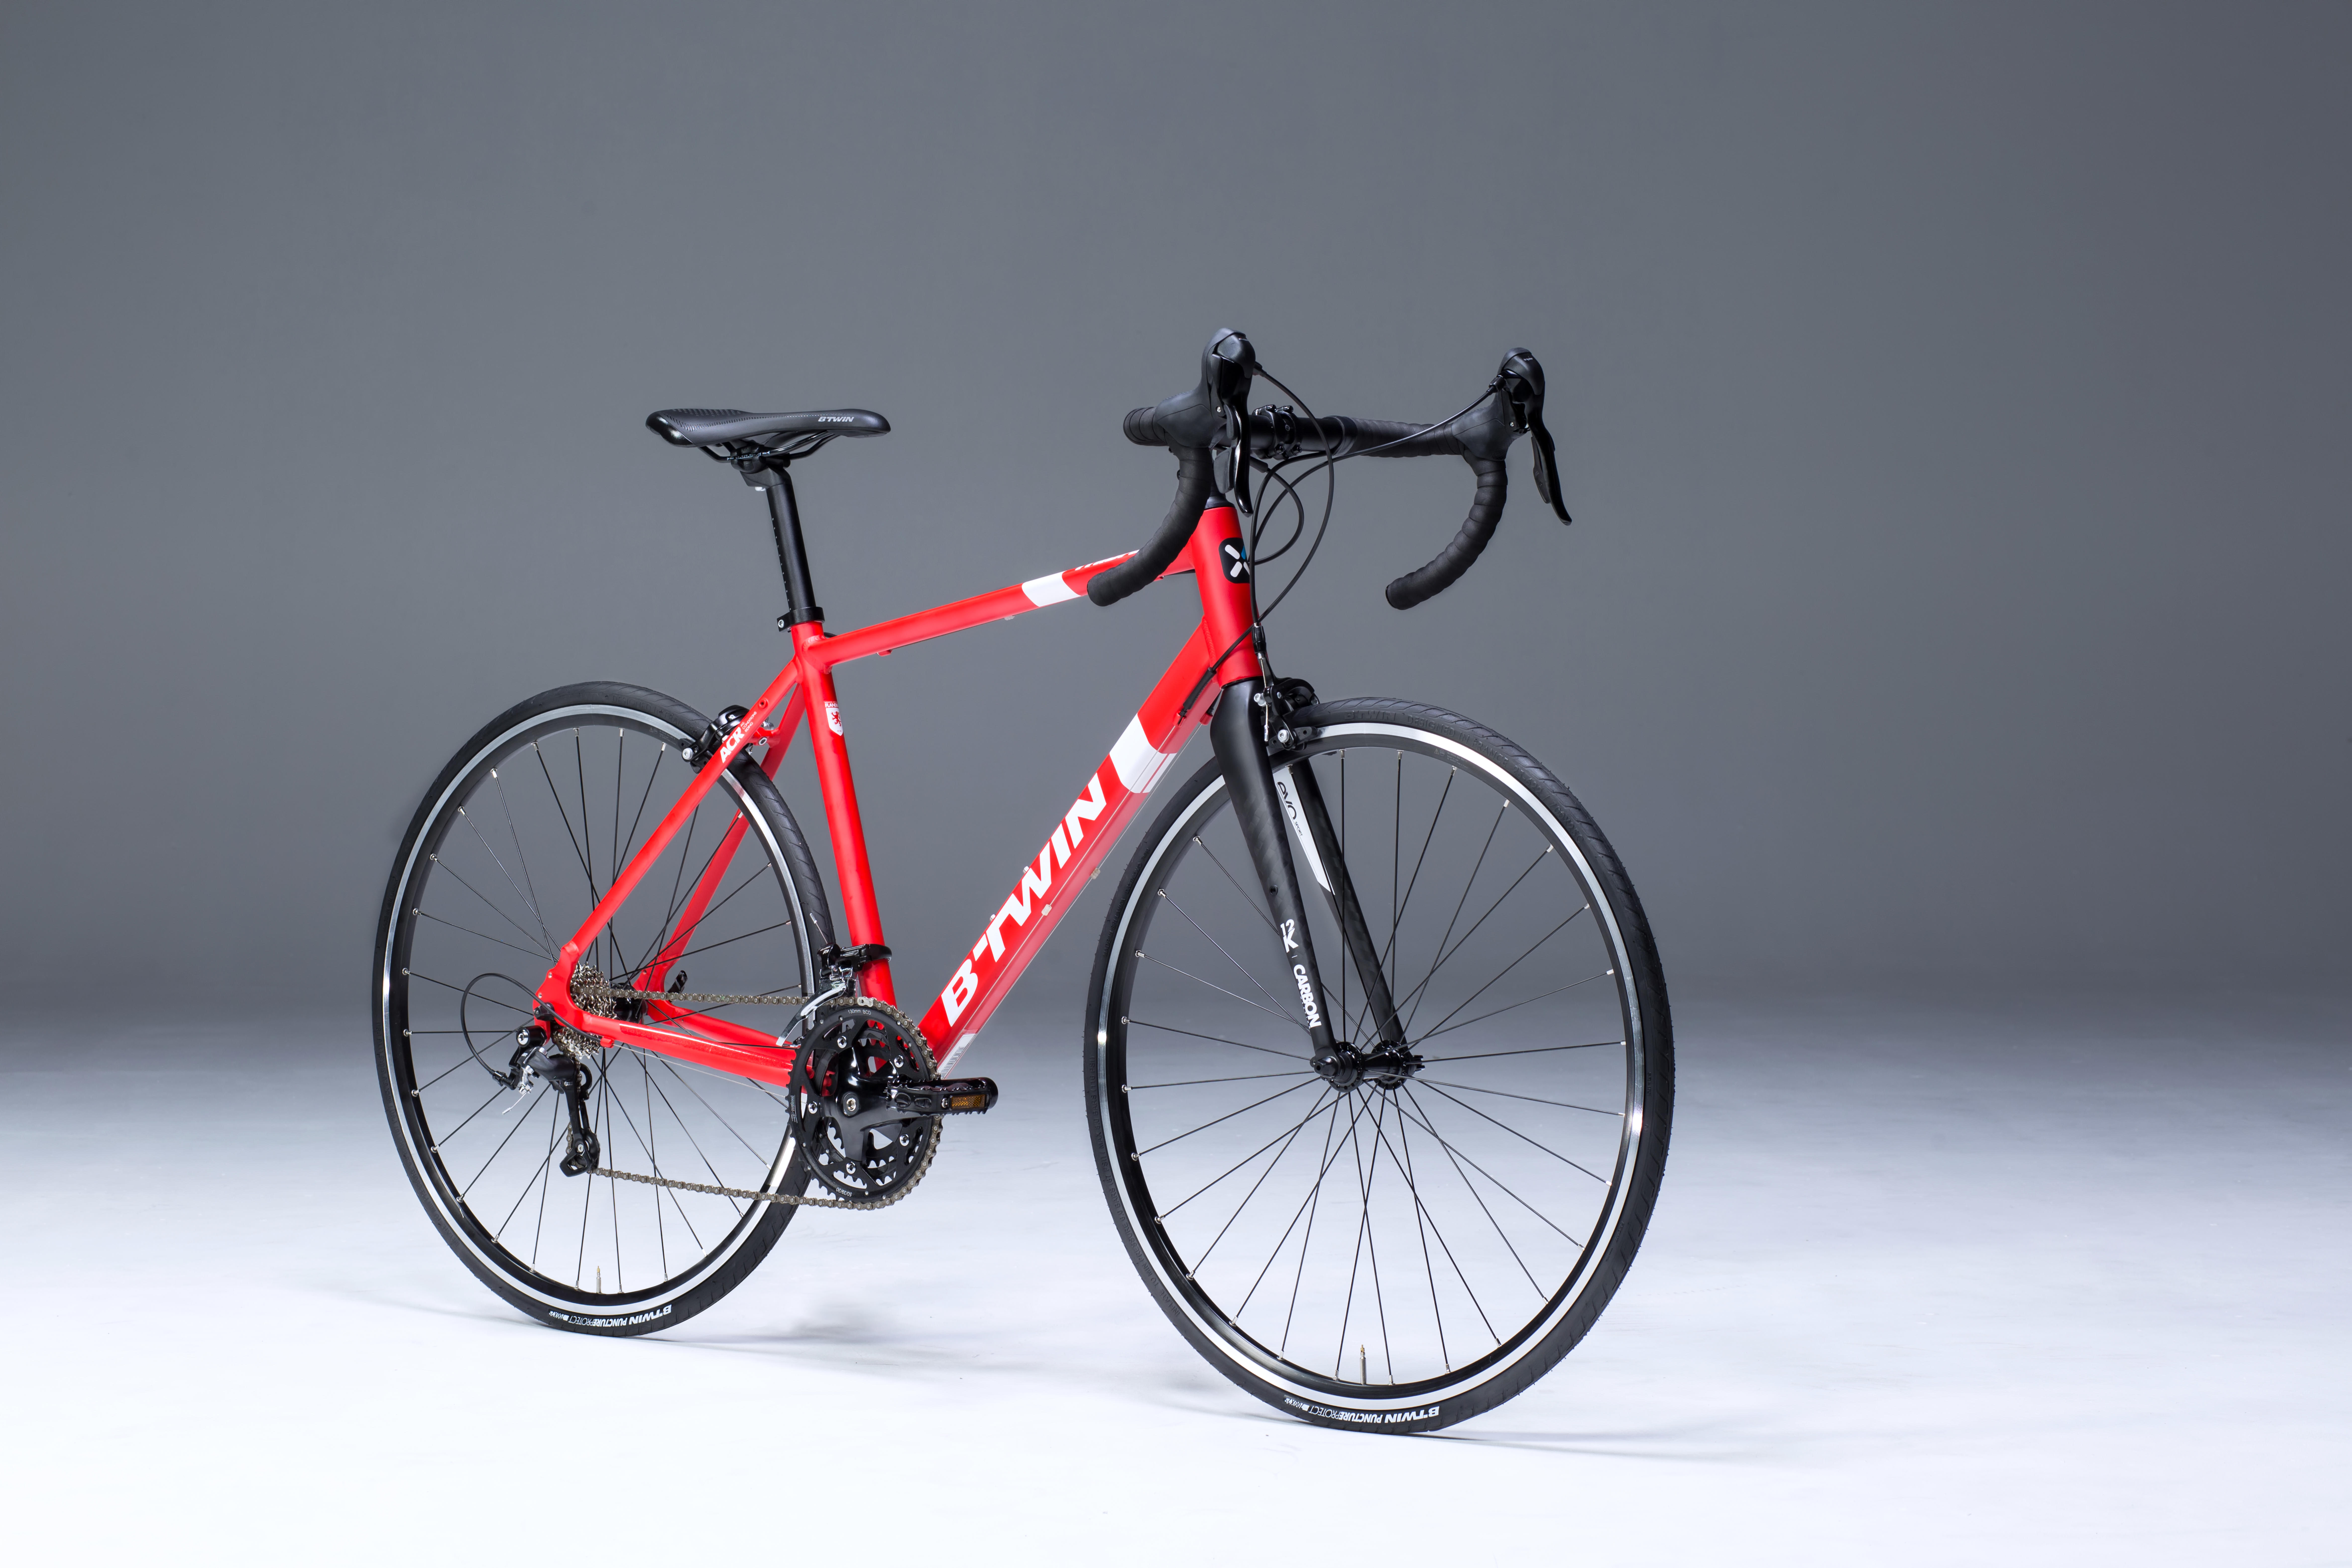 btwin triban 500 red